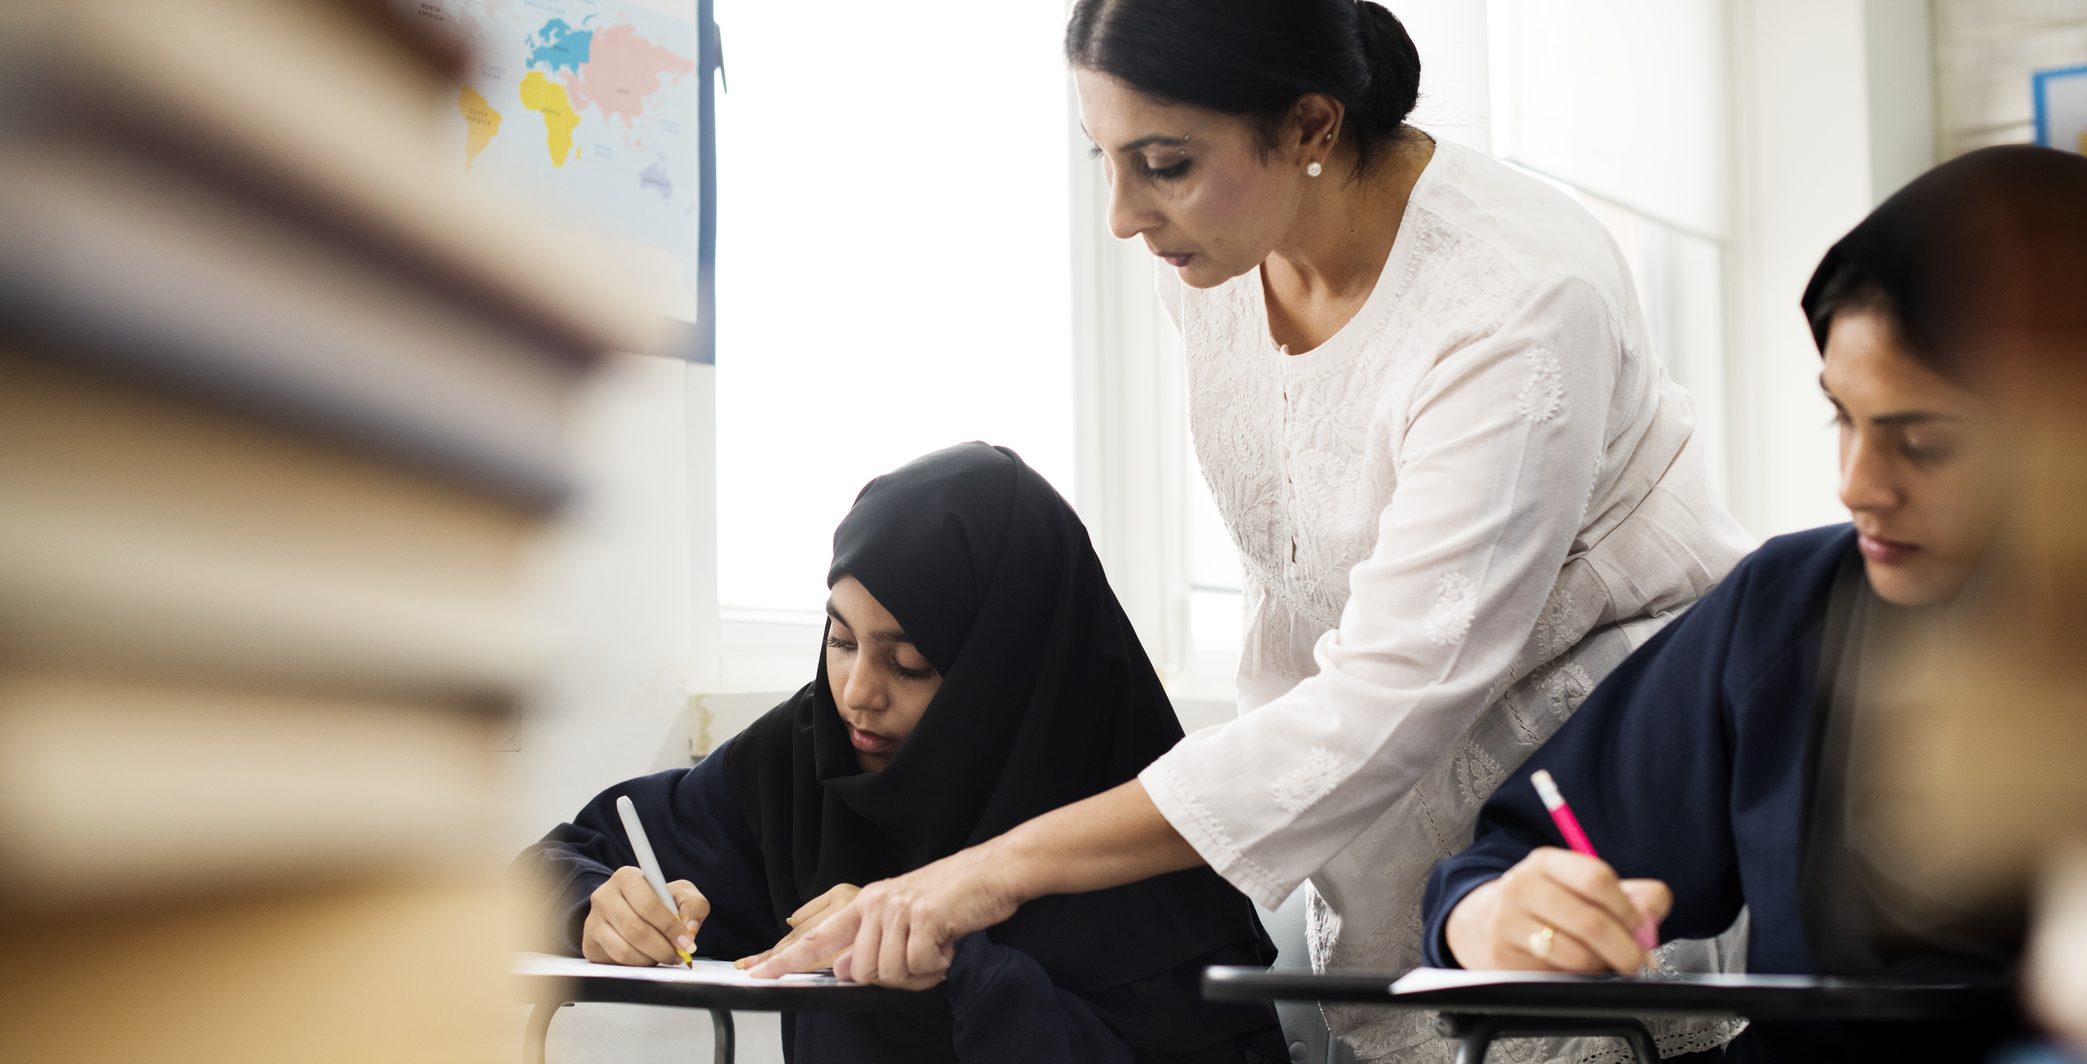 Diverse Muslim girls studying in classroom